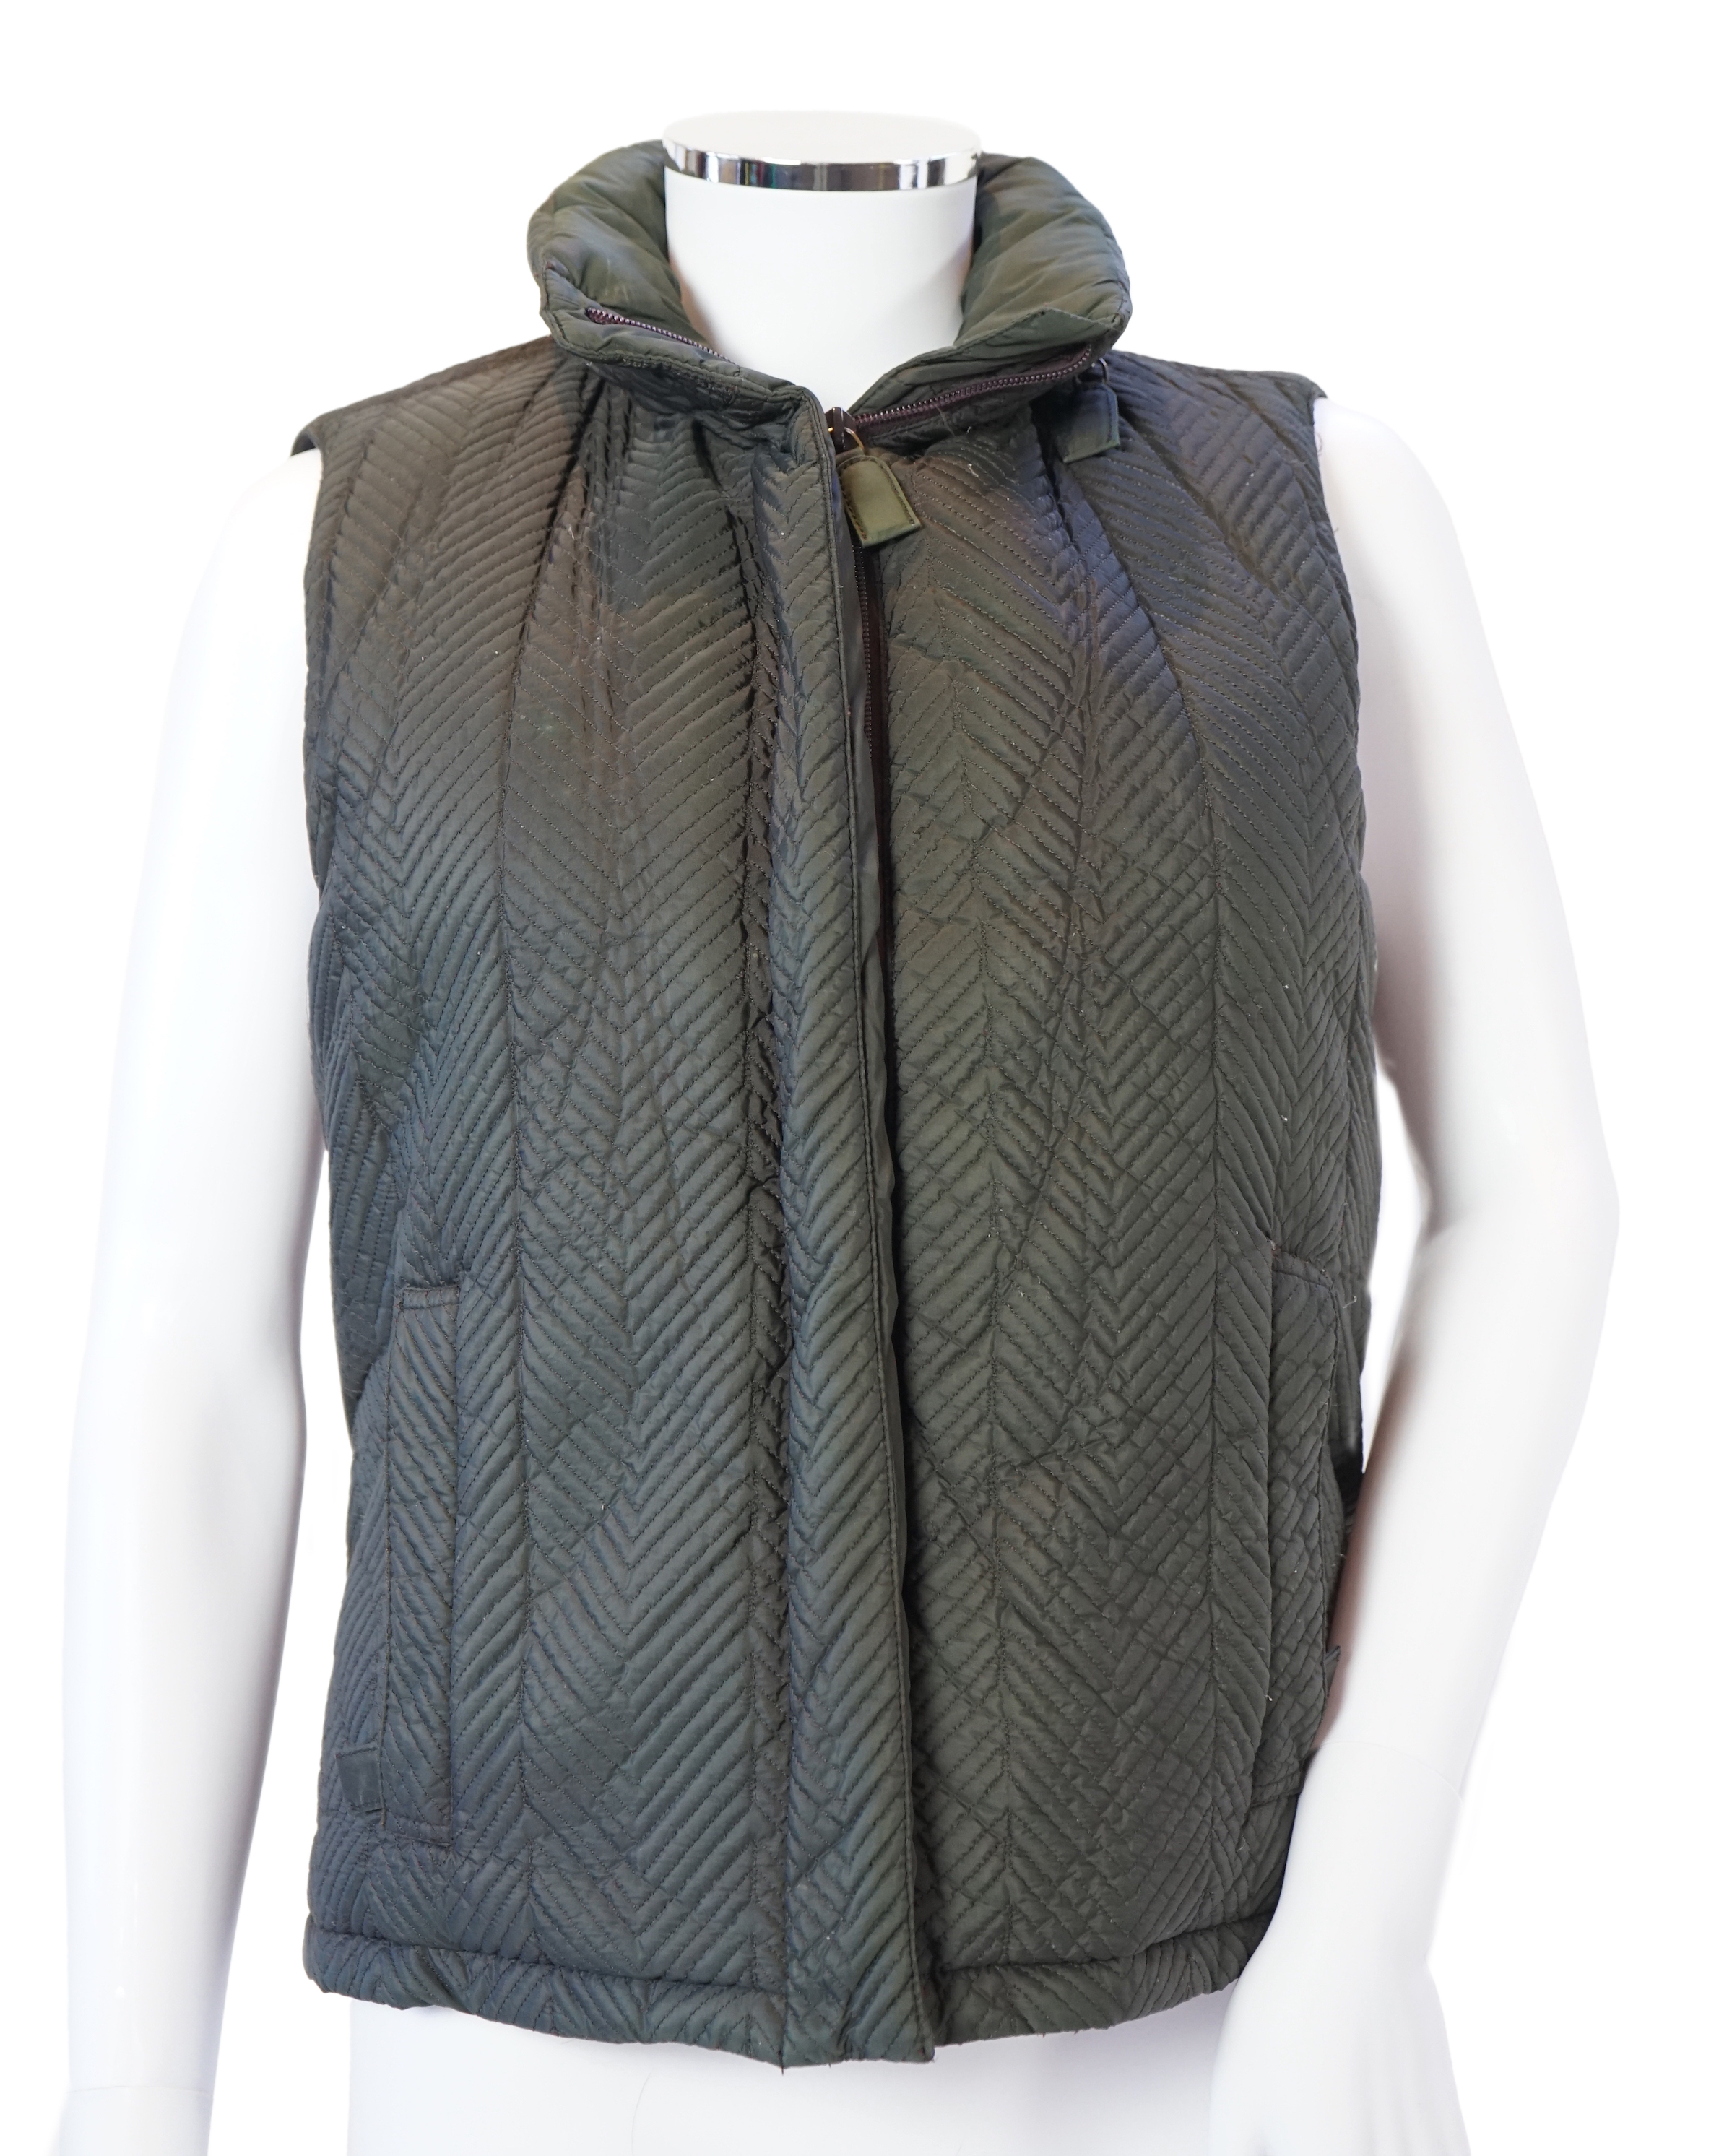 A Prada quilted olive green and brown lady's gilet with hood in collar, size M